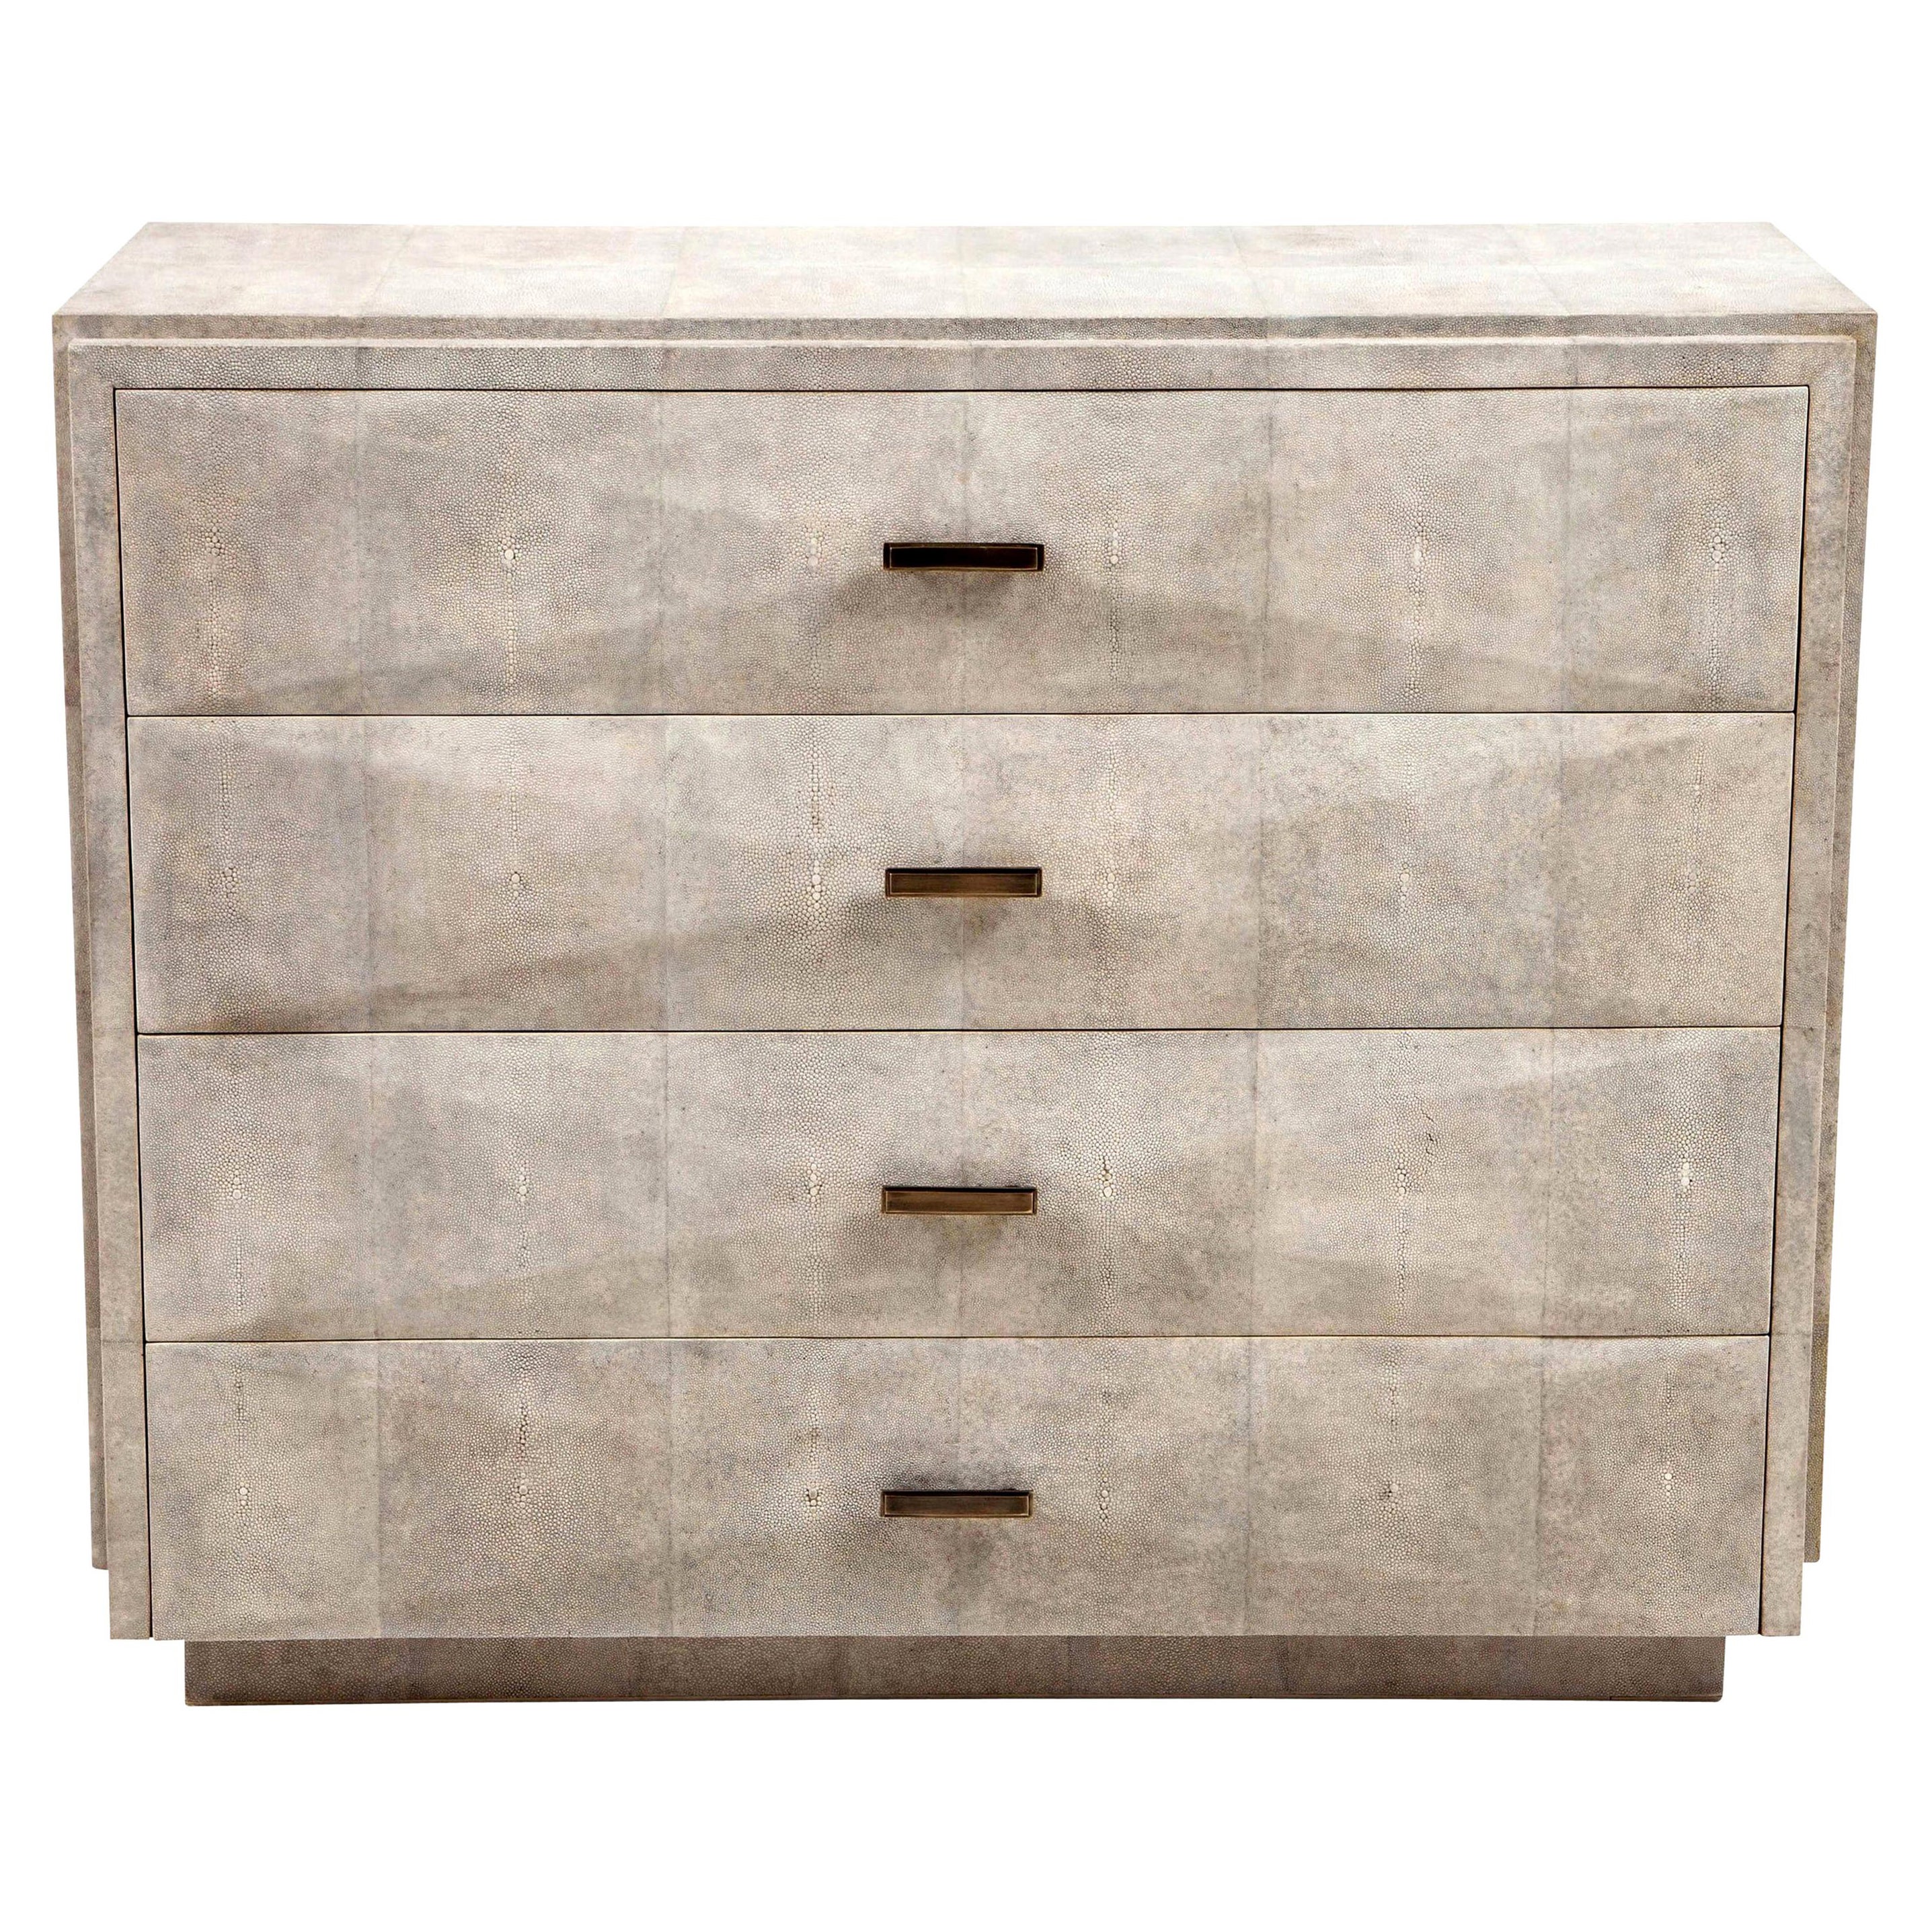 Shagreen Dresser with Brass Handles, Cream, Contemporary, Art Deco Style, Large For Sale